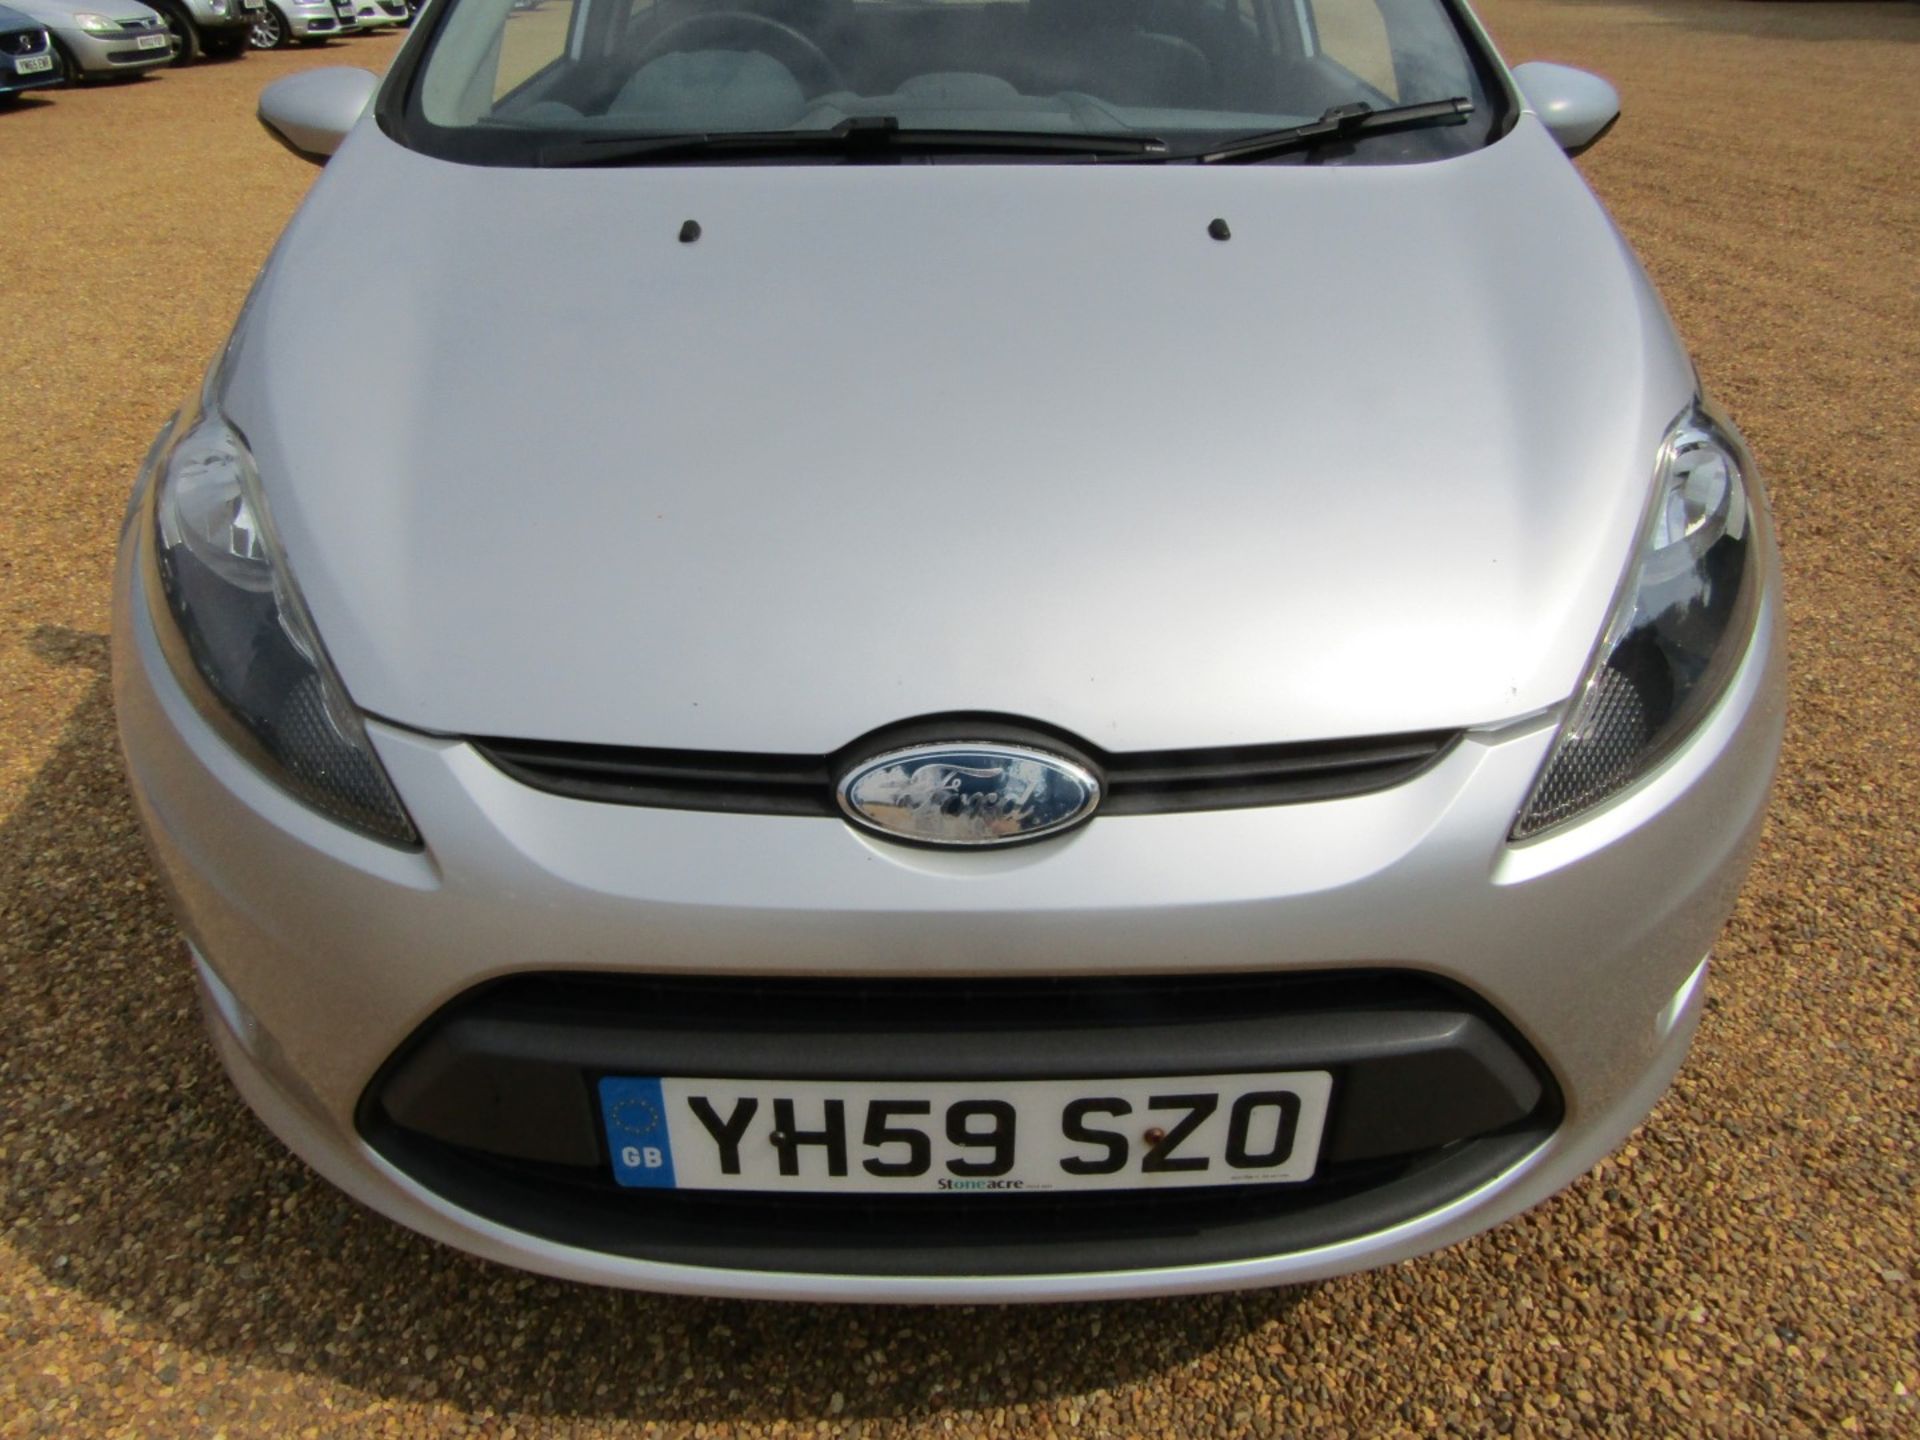 59 09 Ford Fiesta Style 82 - Image 17 of 18